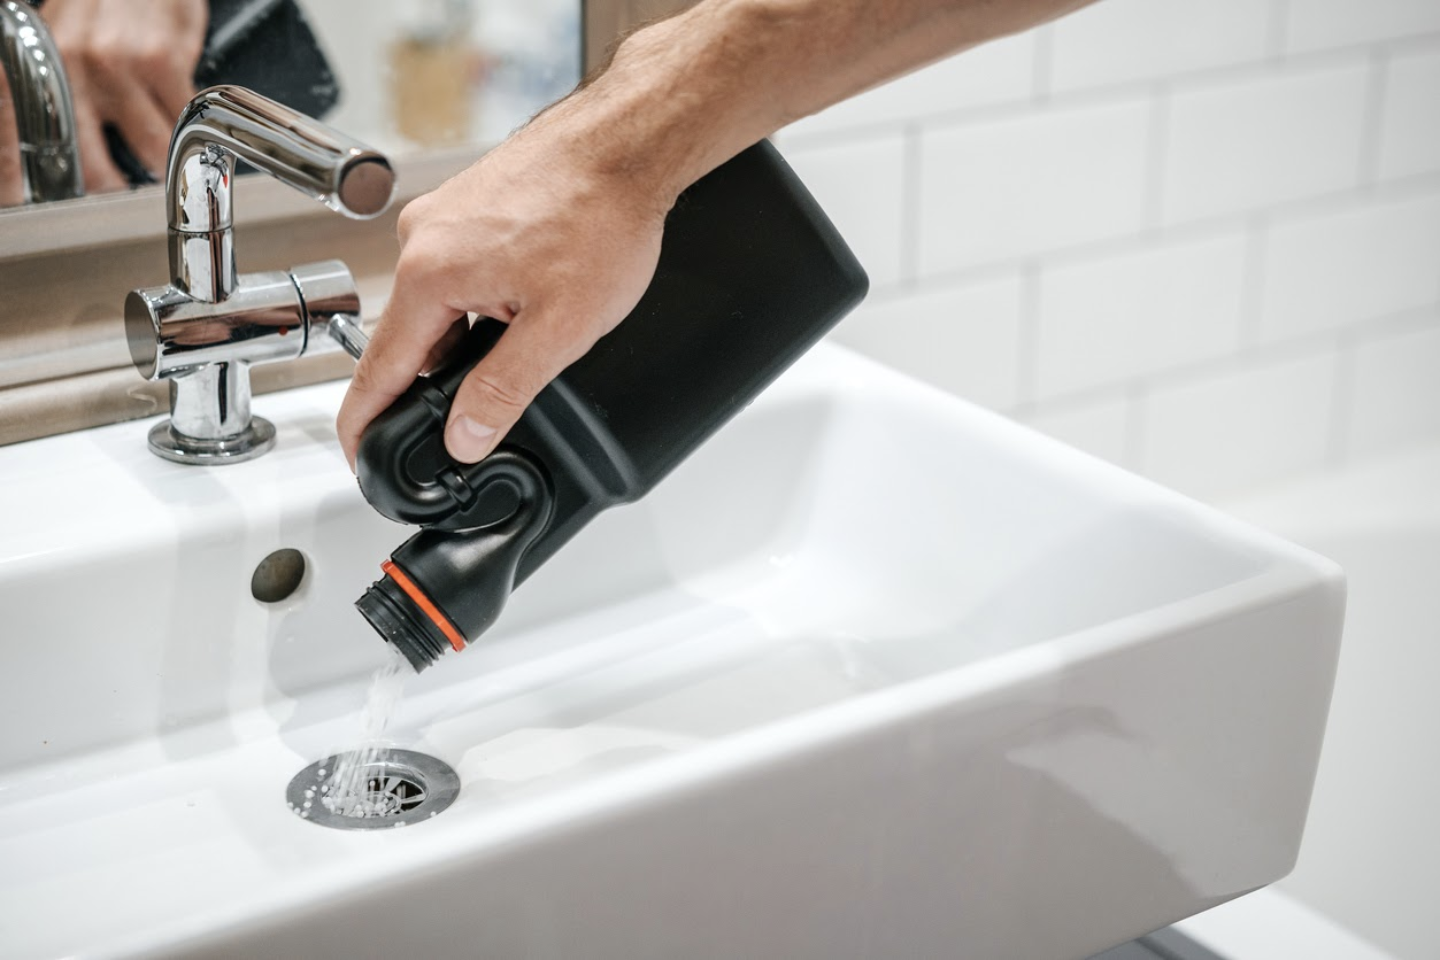 How to Unclog a Bathroom Sink - Easily Fix Common Clogs